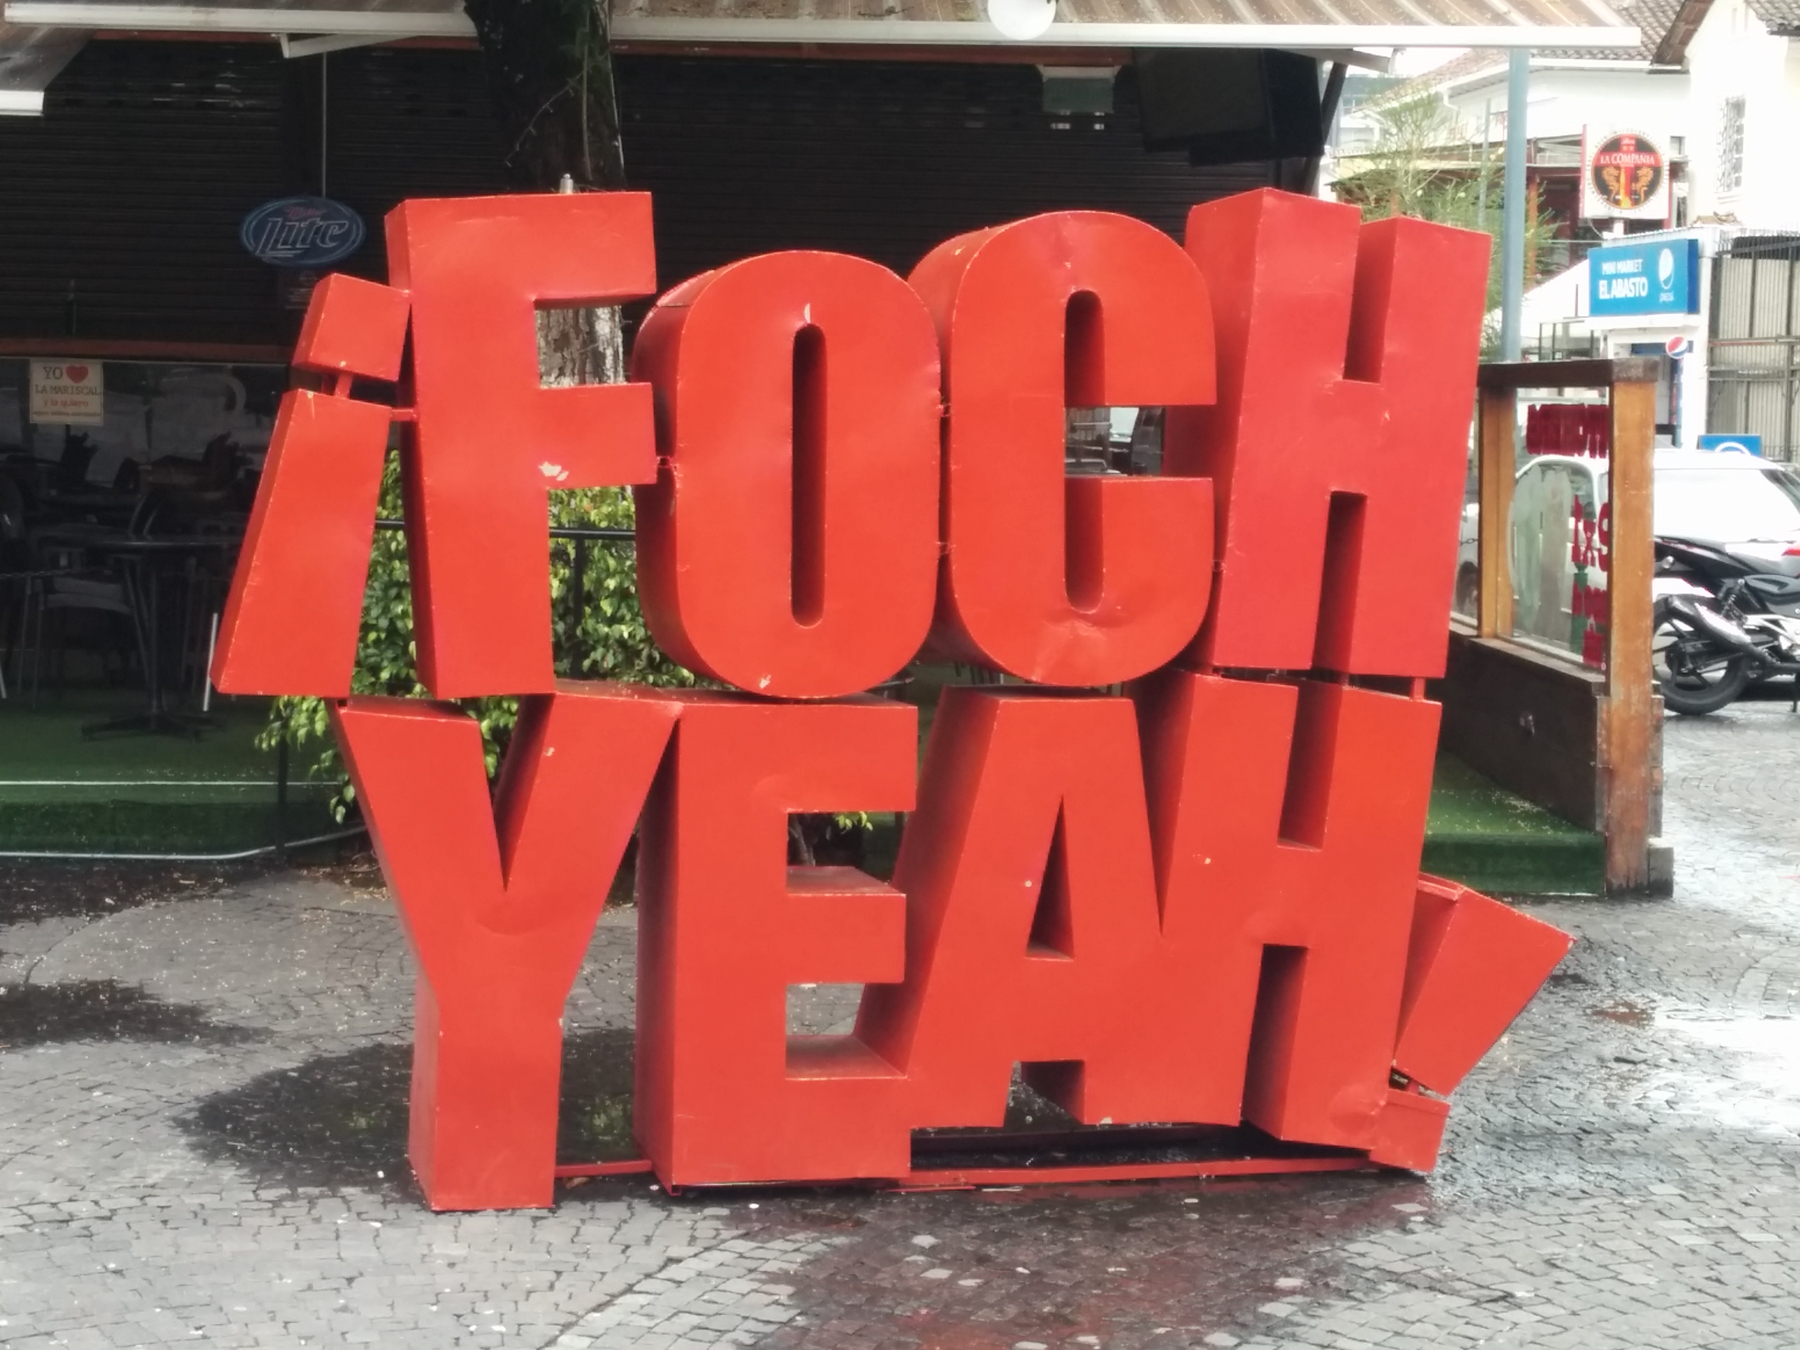 The ¡Foch Yeah! sign from the very hip Plaza Foch neighborhood in Quito, Ecuador.